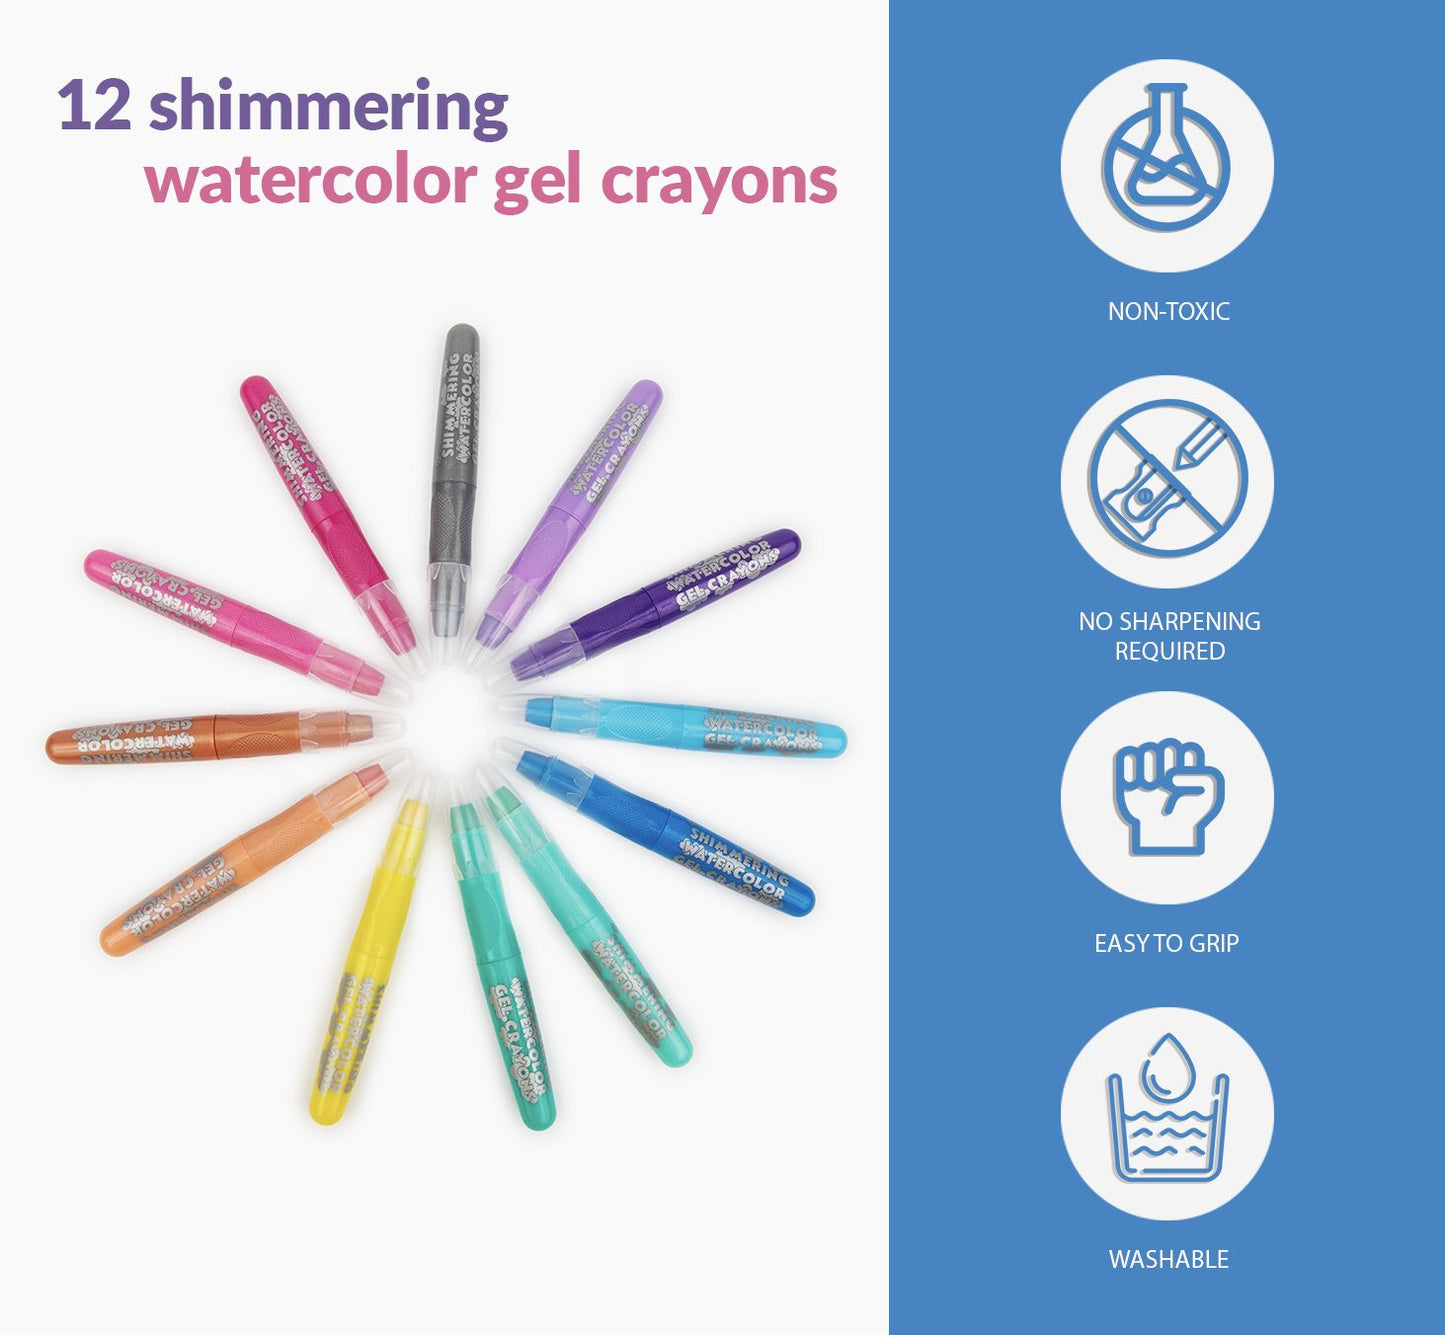 Buy a 6 pack!  Glitter watercolor crayons